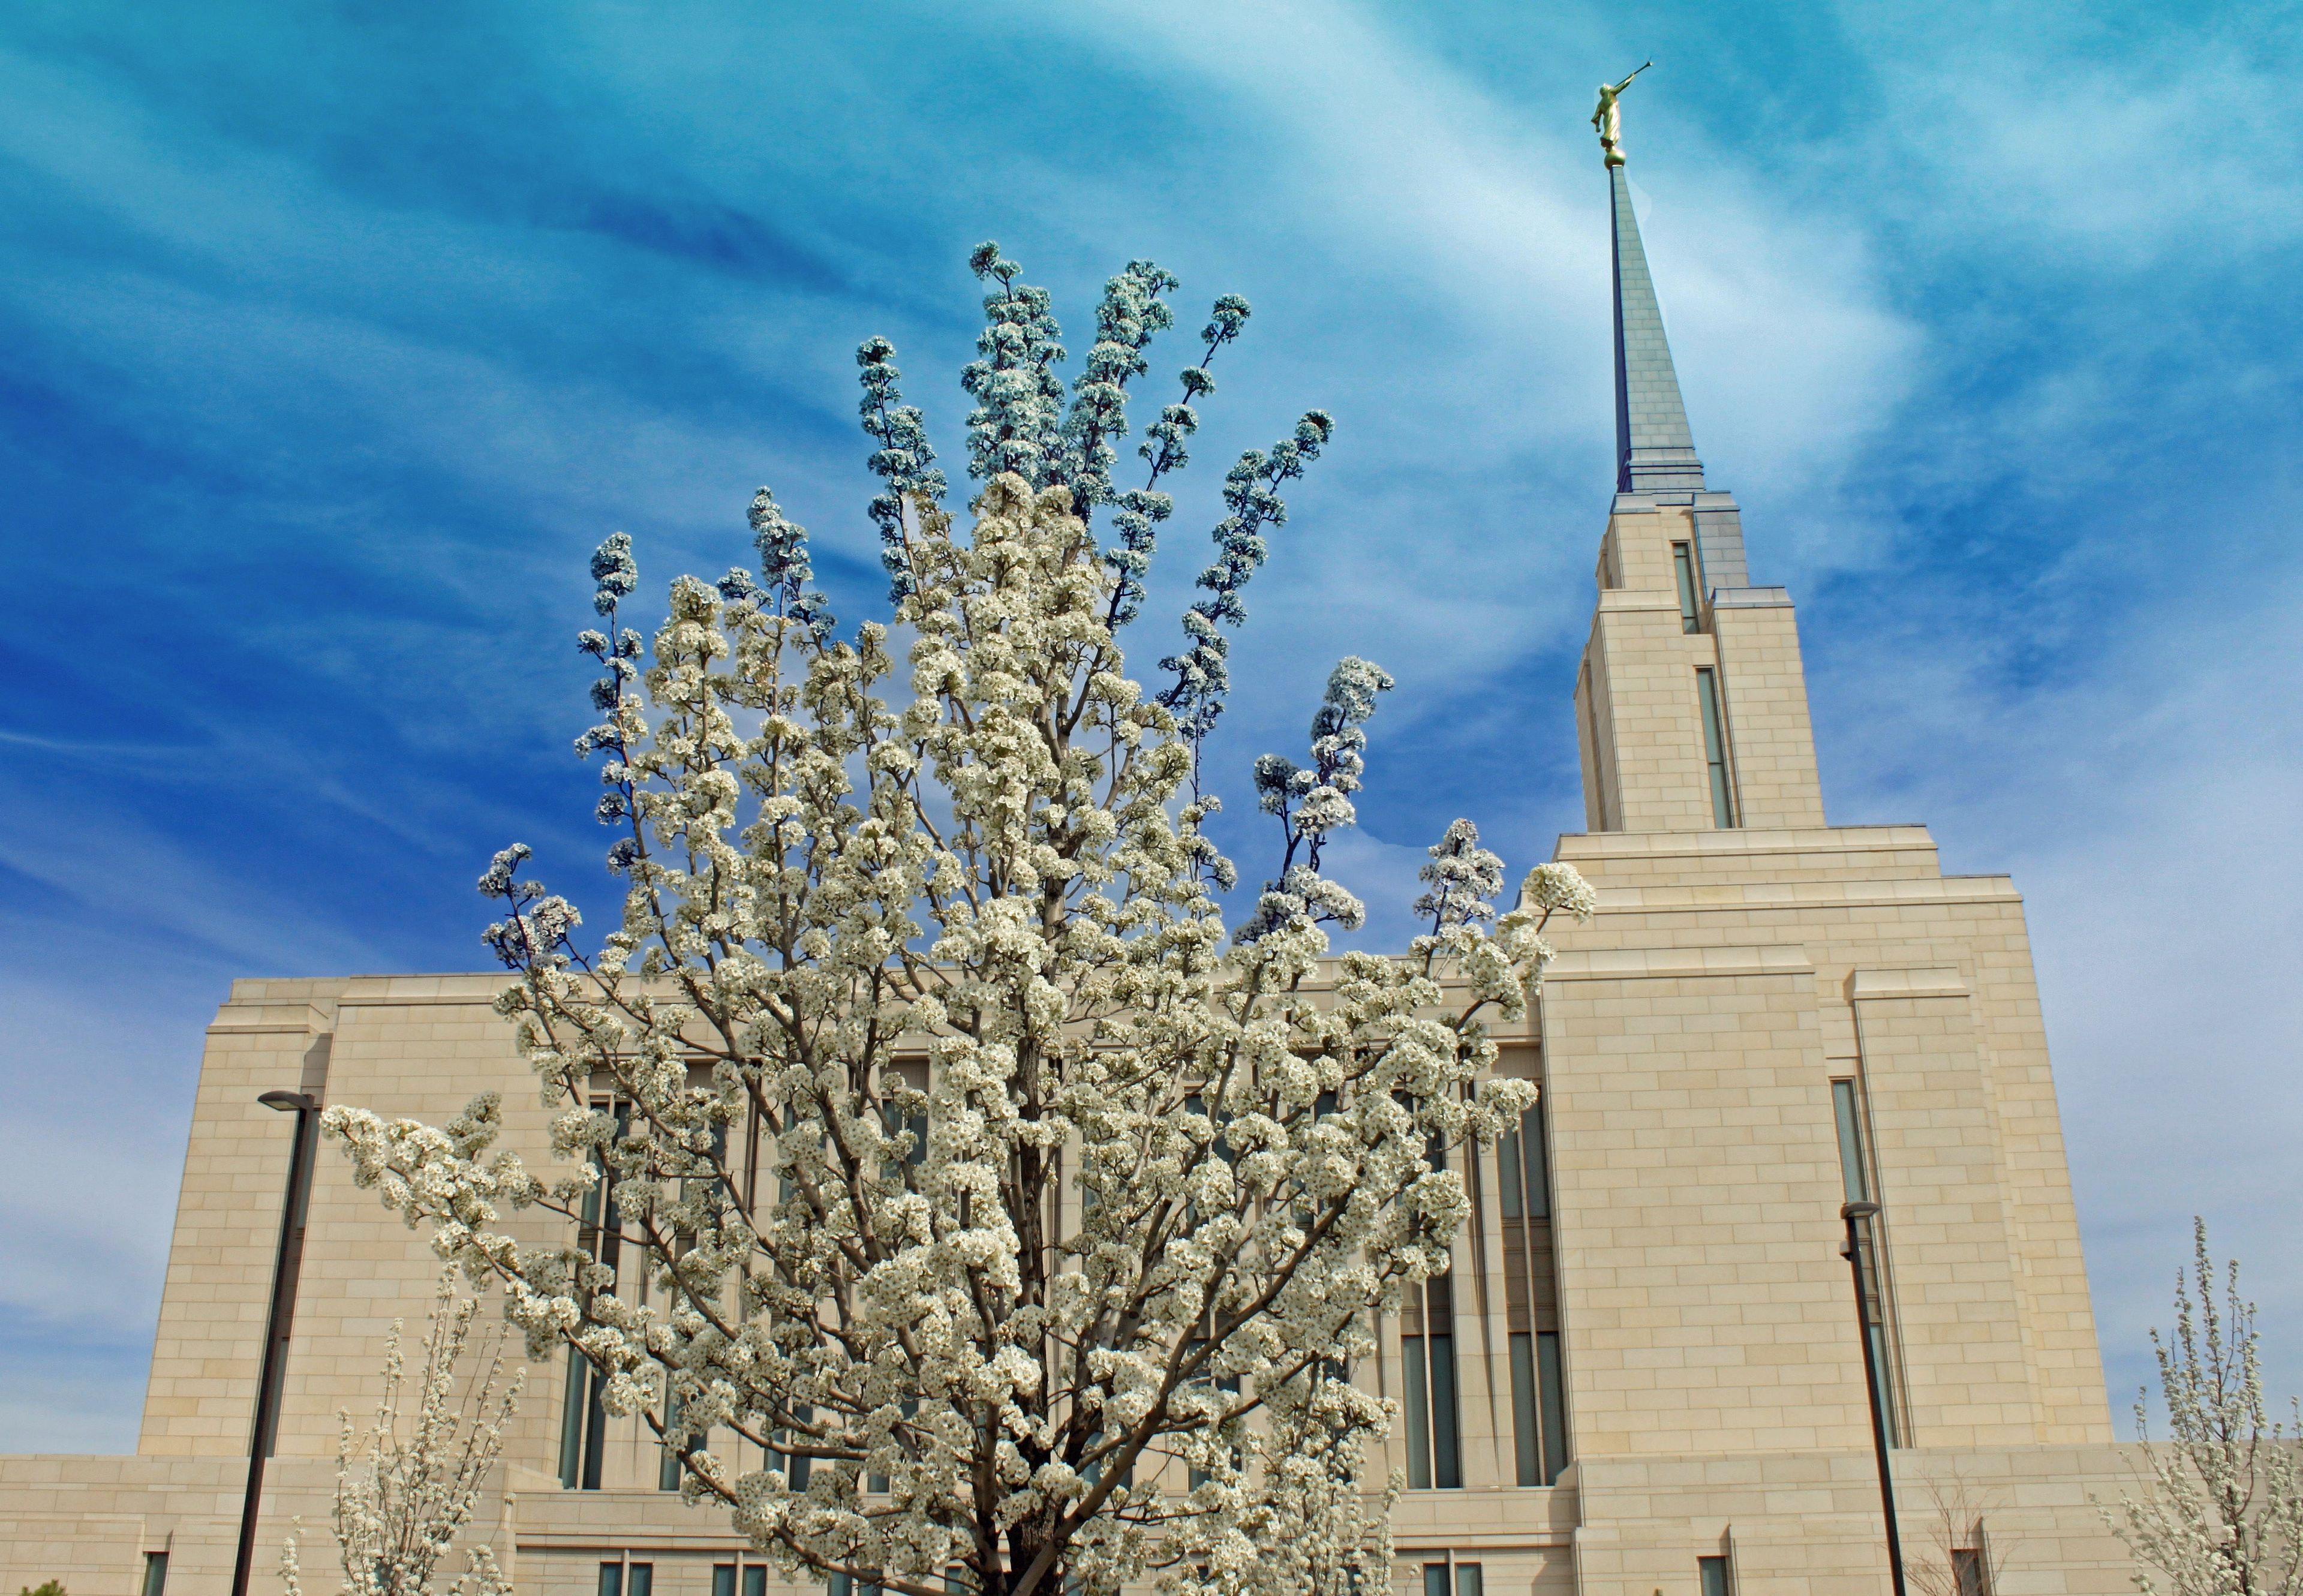 The Oquirrh Mountain Utah Temple side view, including the exterior of the temple, the spire, and scenery.